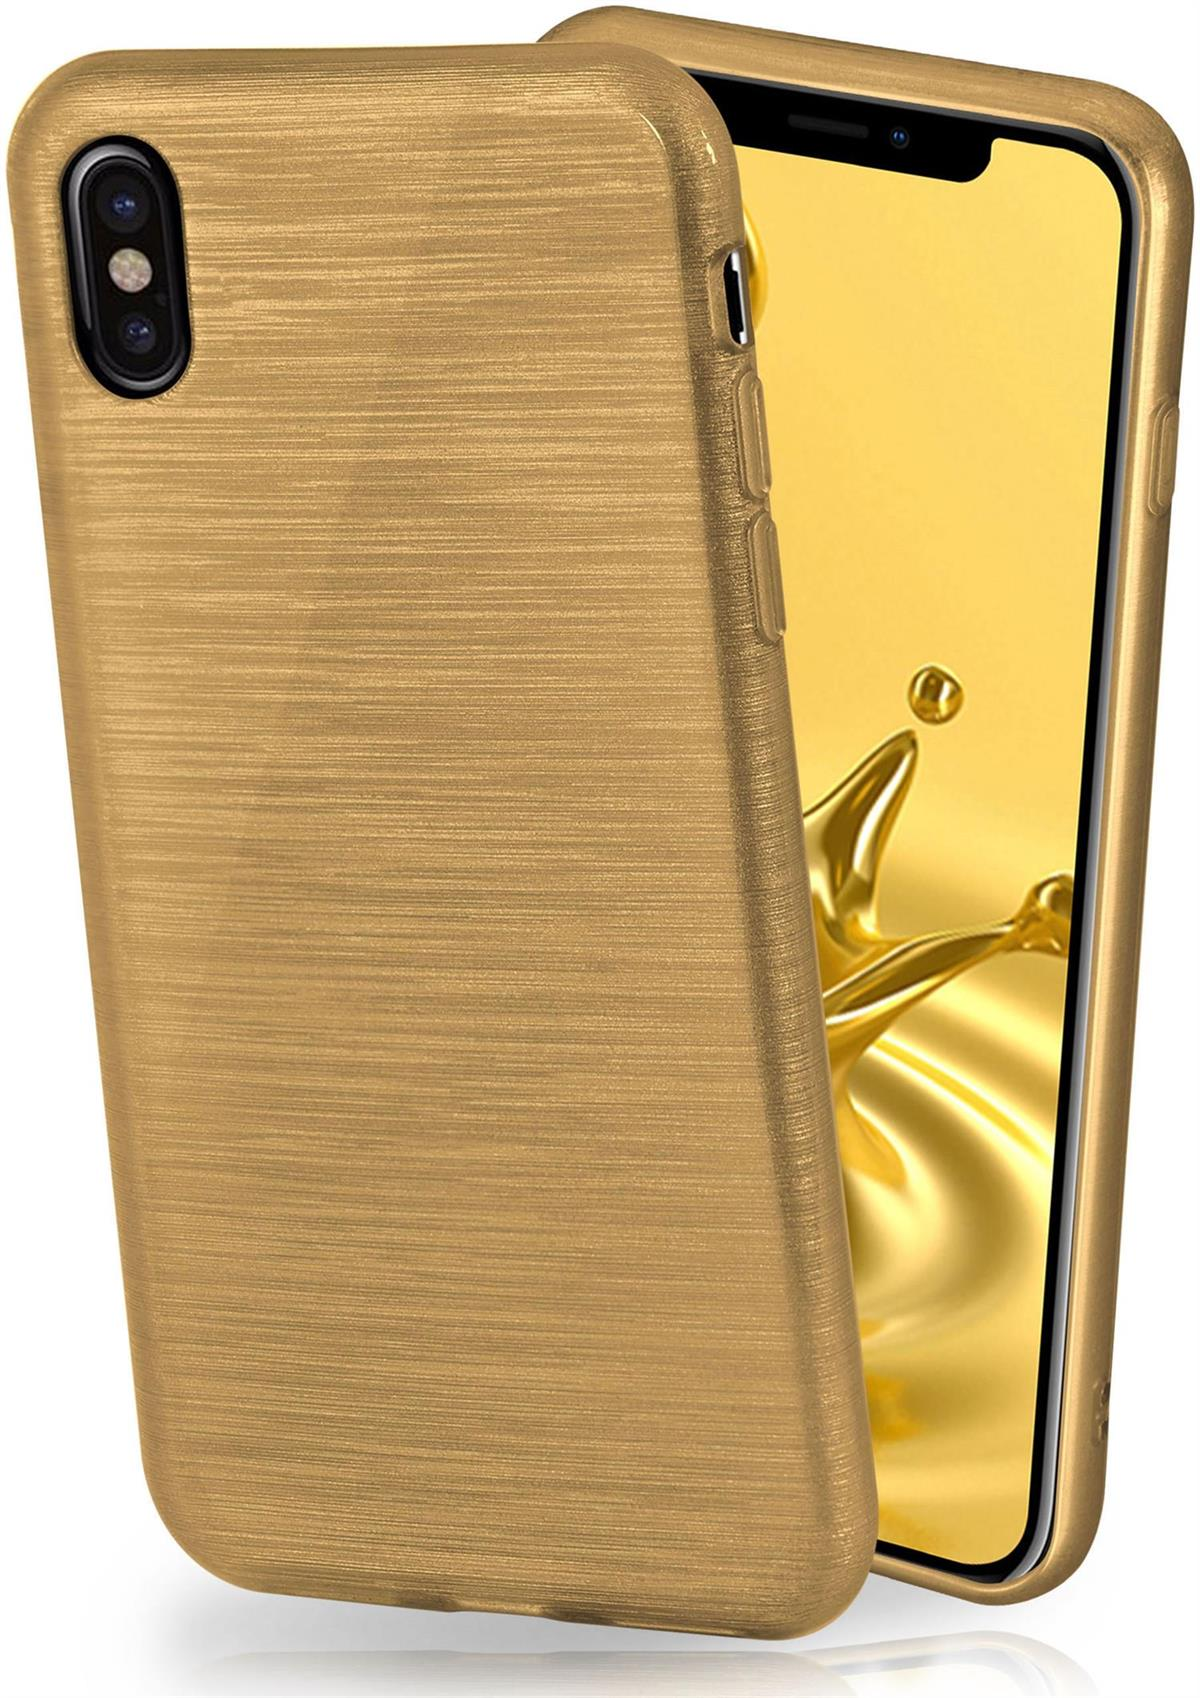 Brushed Apple, MOEX Backcover, Ivory-Gold Case, iPhone X,